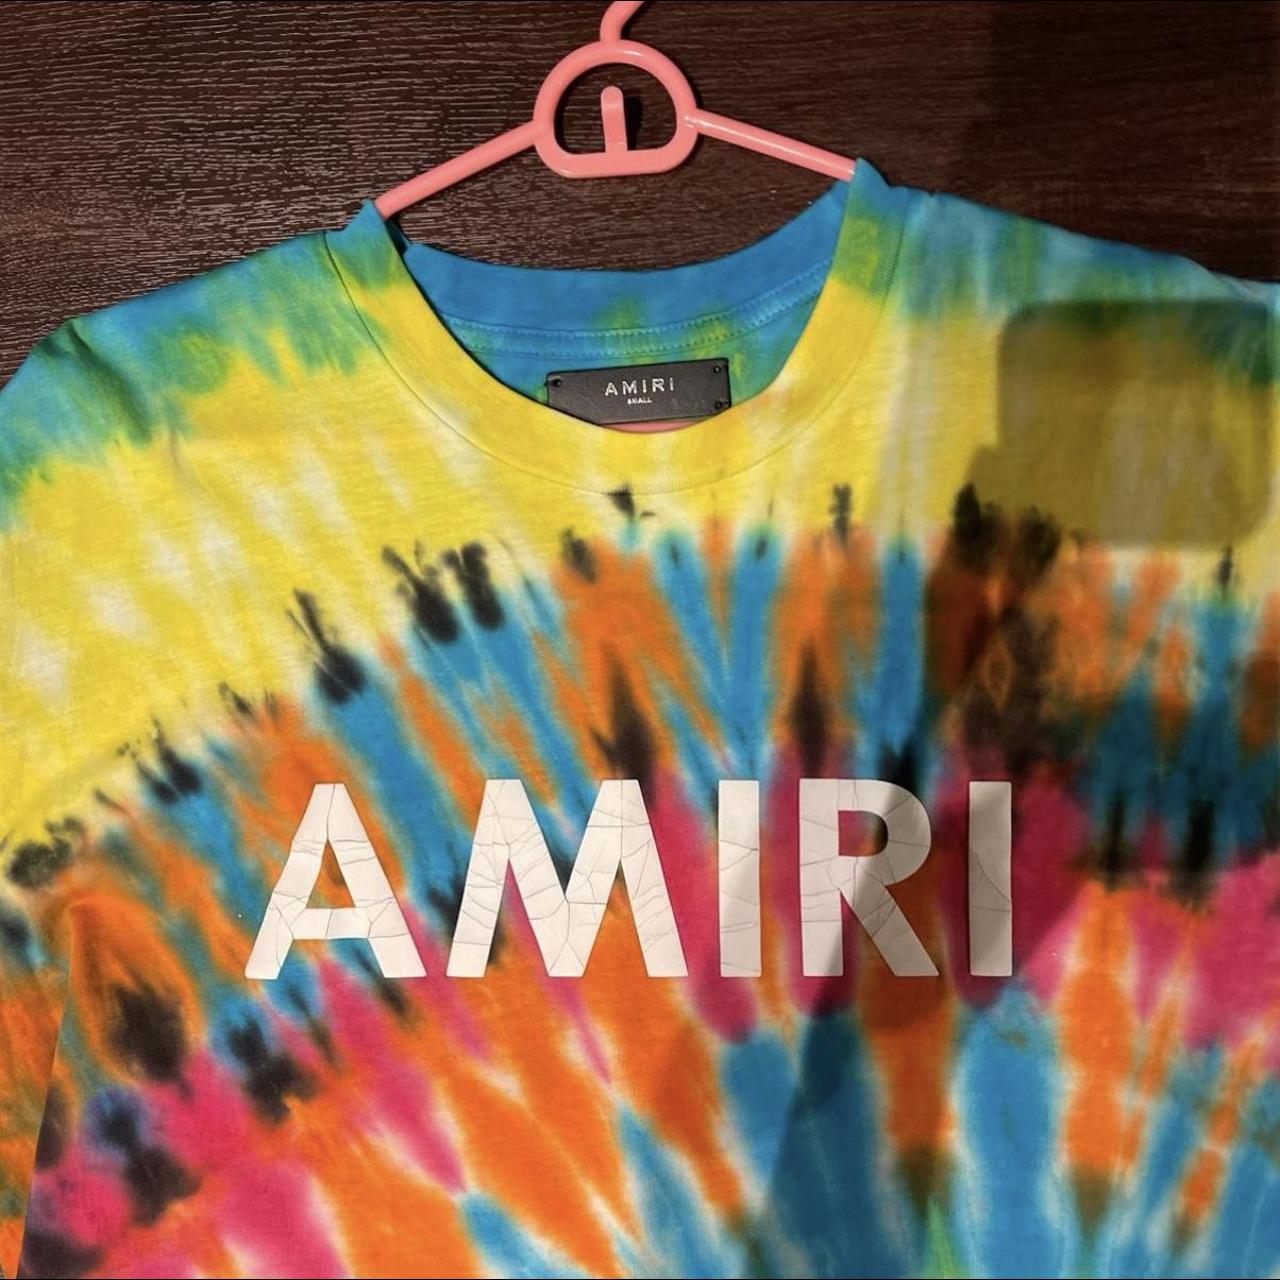 Product Image 2 - Amiri tie dye shirt
Offer?? Message